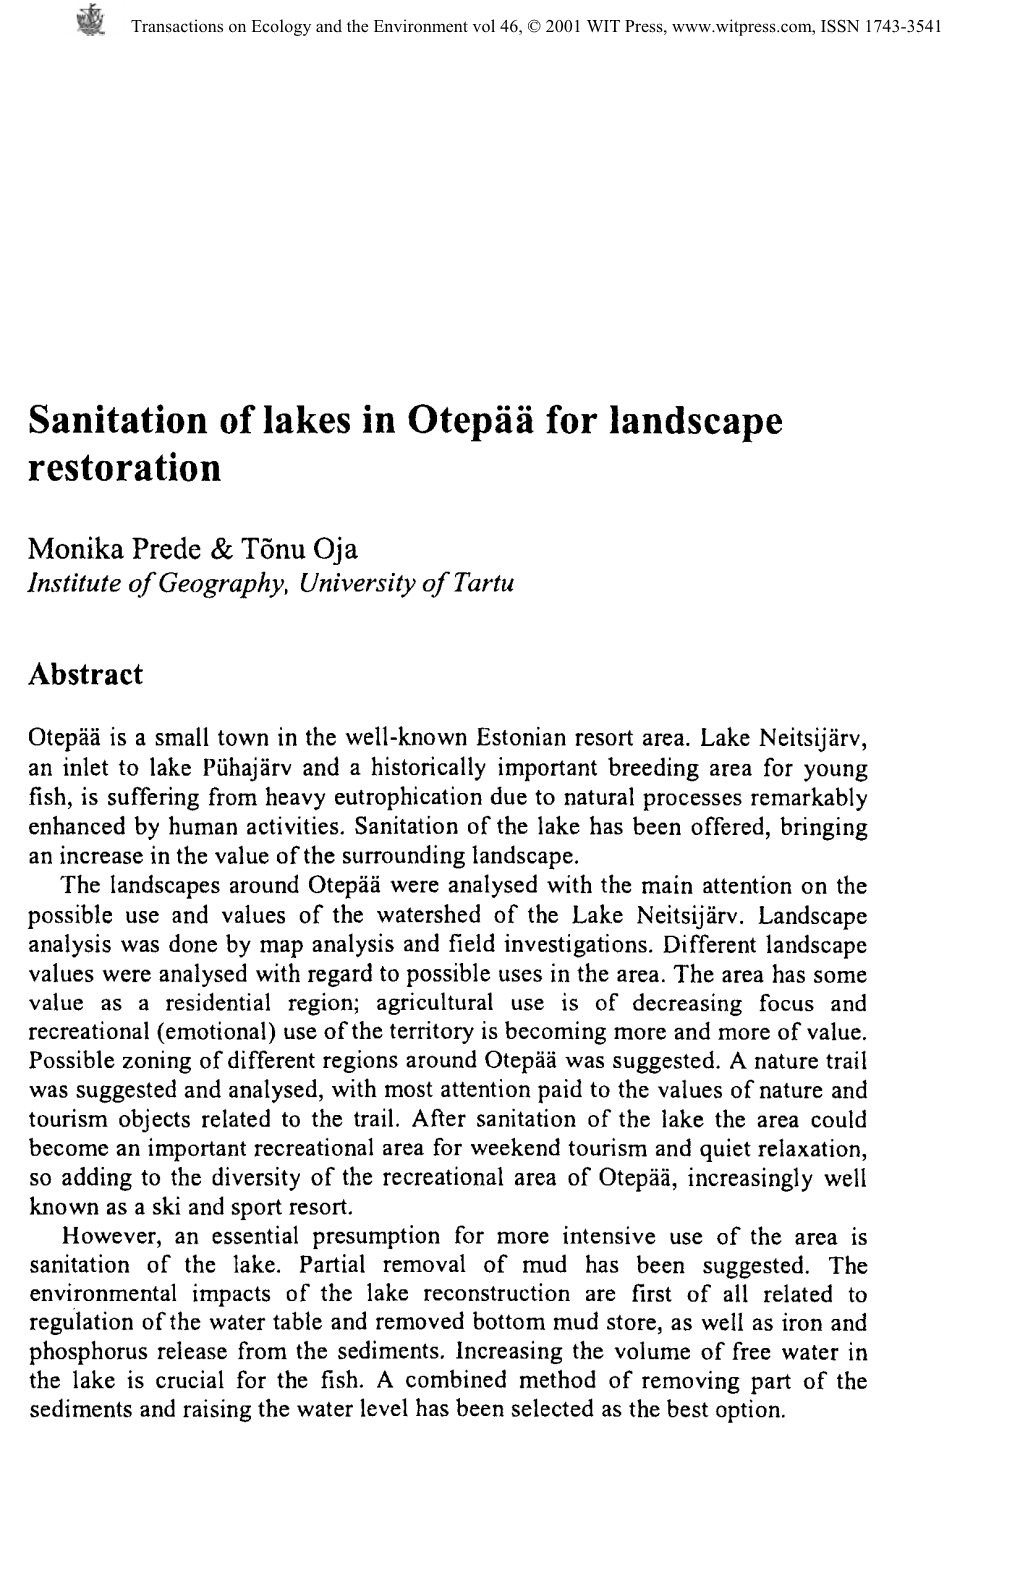 Sanitation of Lakes in Otepaa for Landscape Restoration